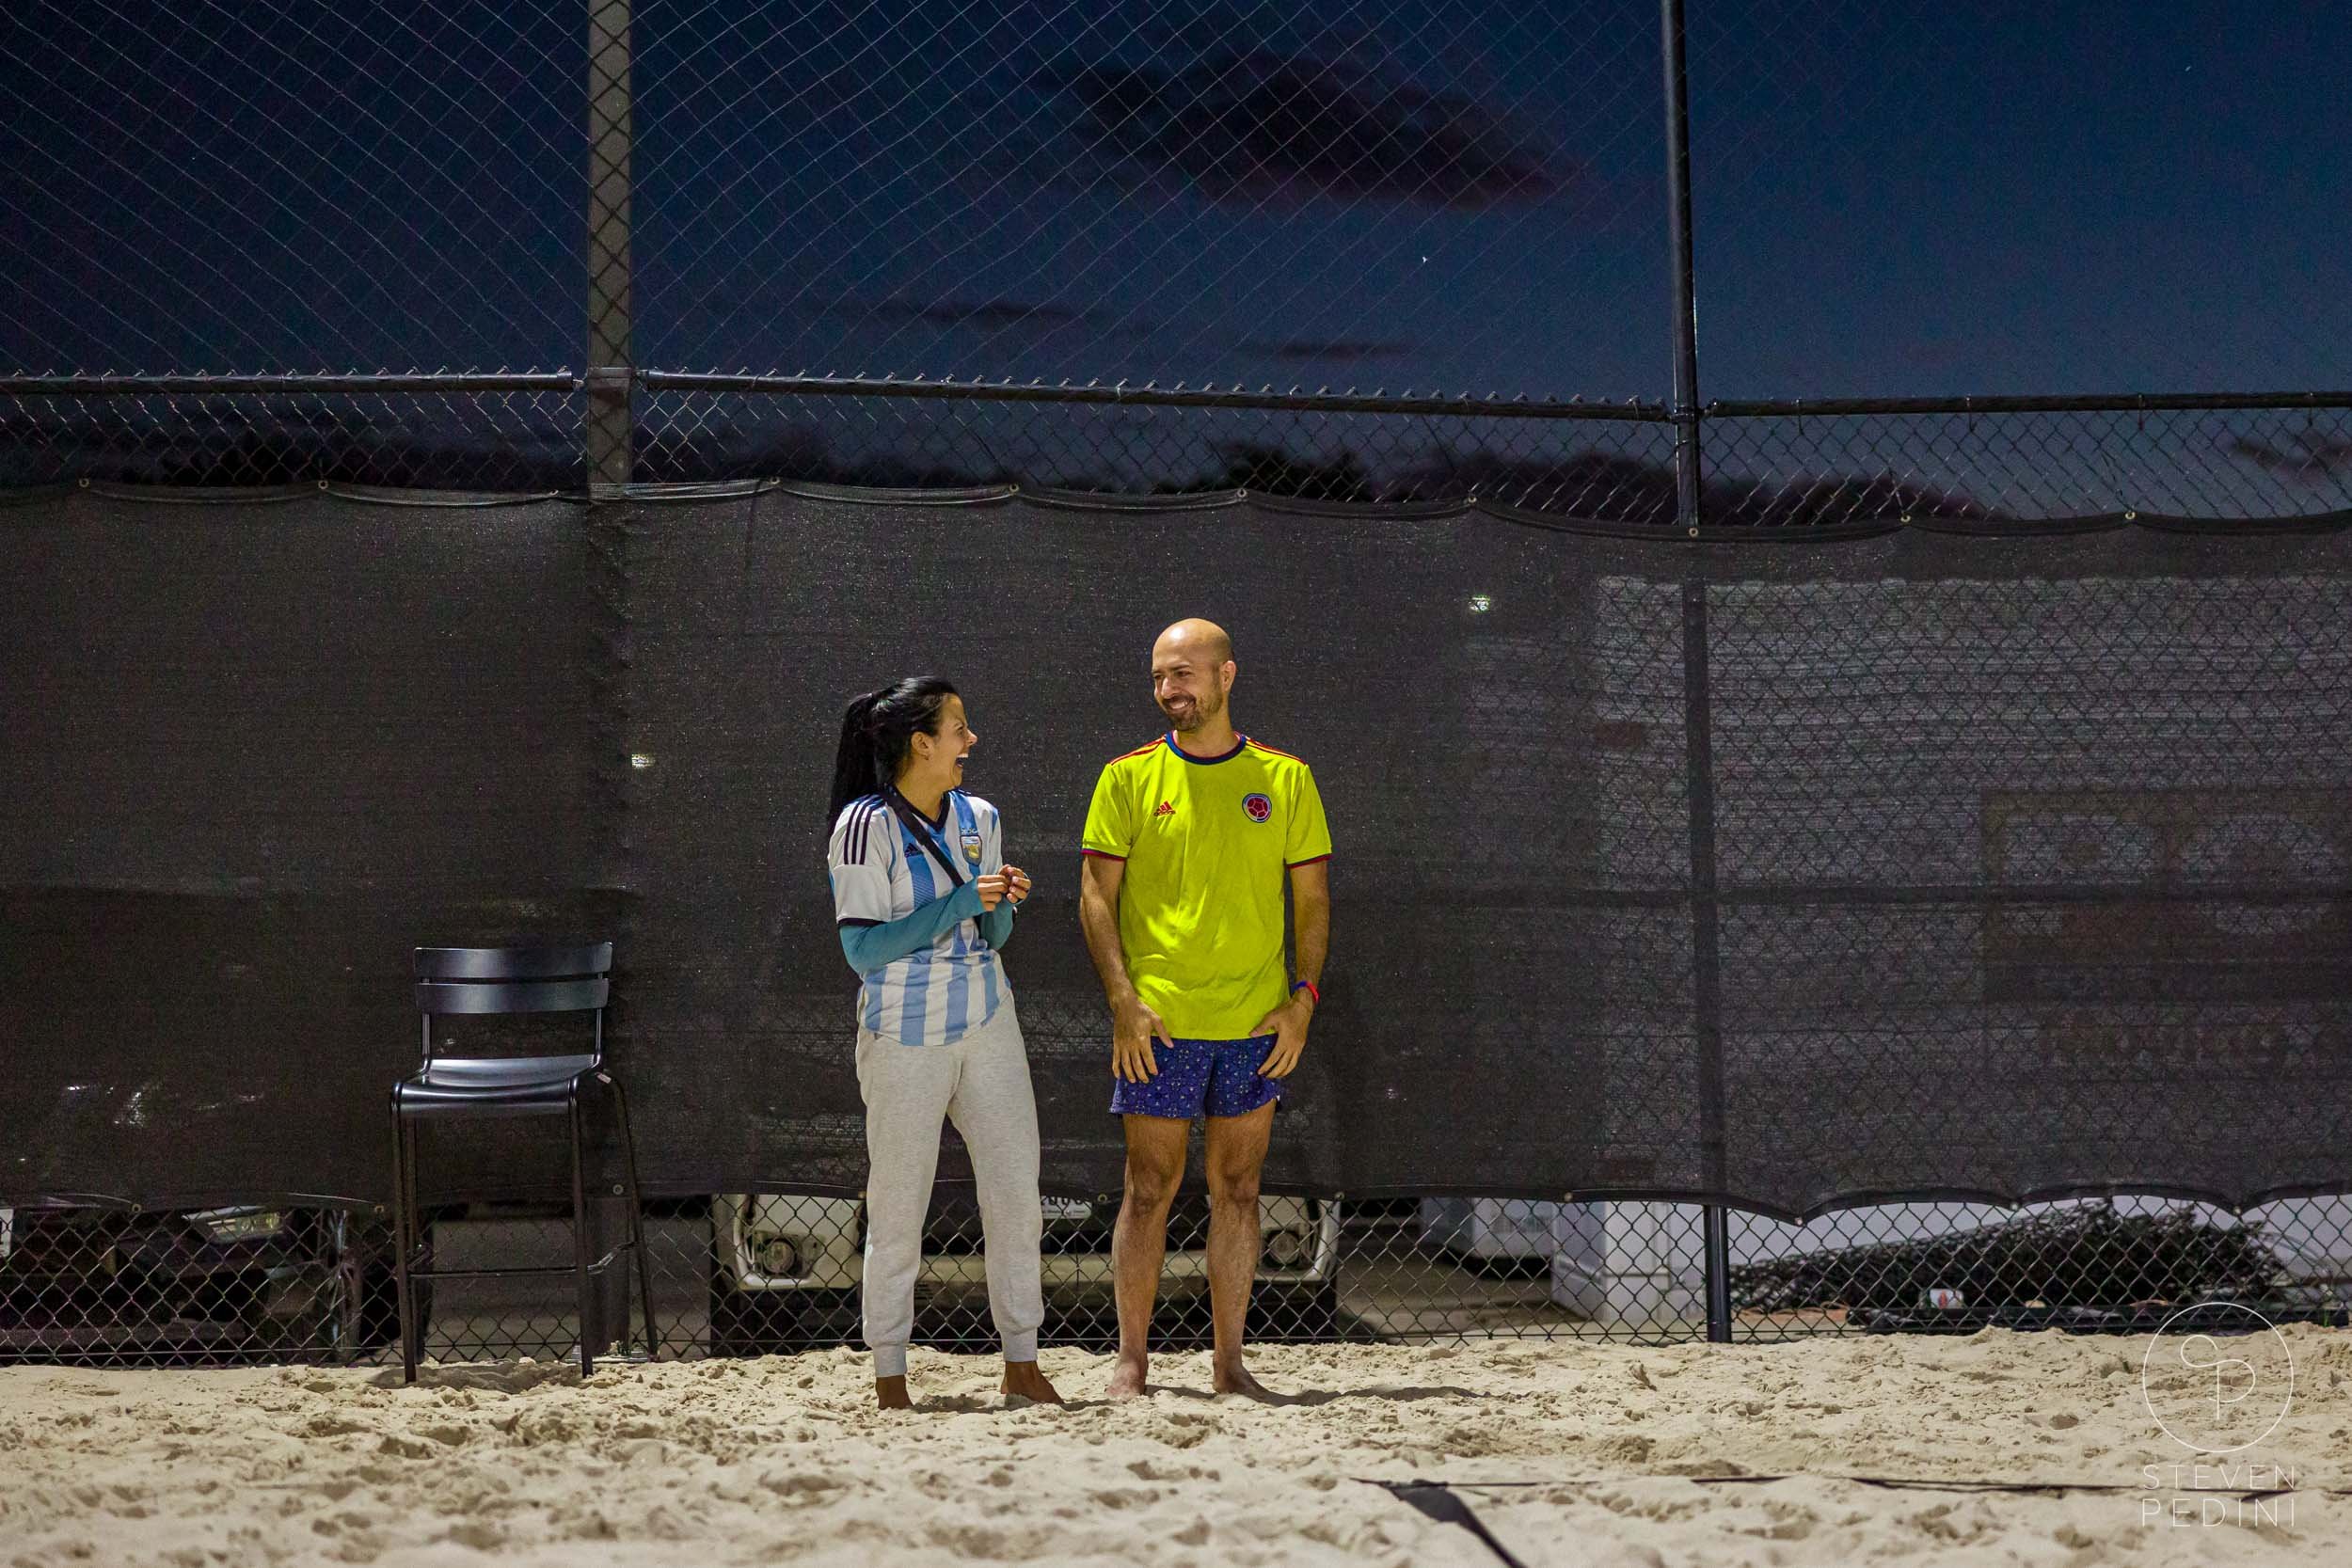 Steven Pedini Photography - Bumpy Pickle - Sand Volleyball - Houston TX - World Cup of Volleyball - 00368.jpg